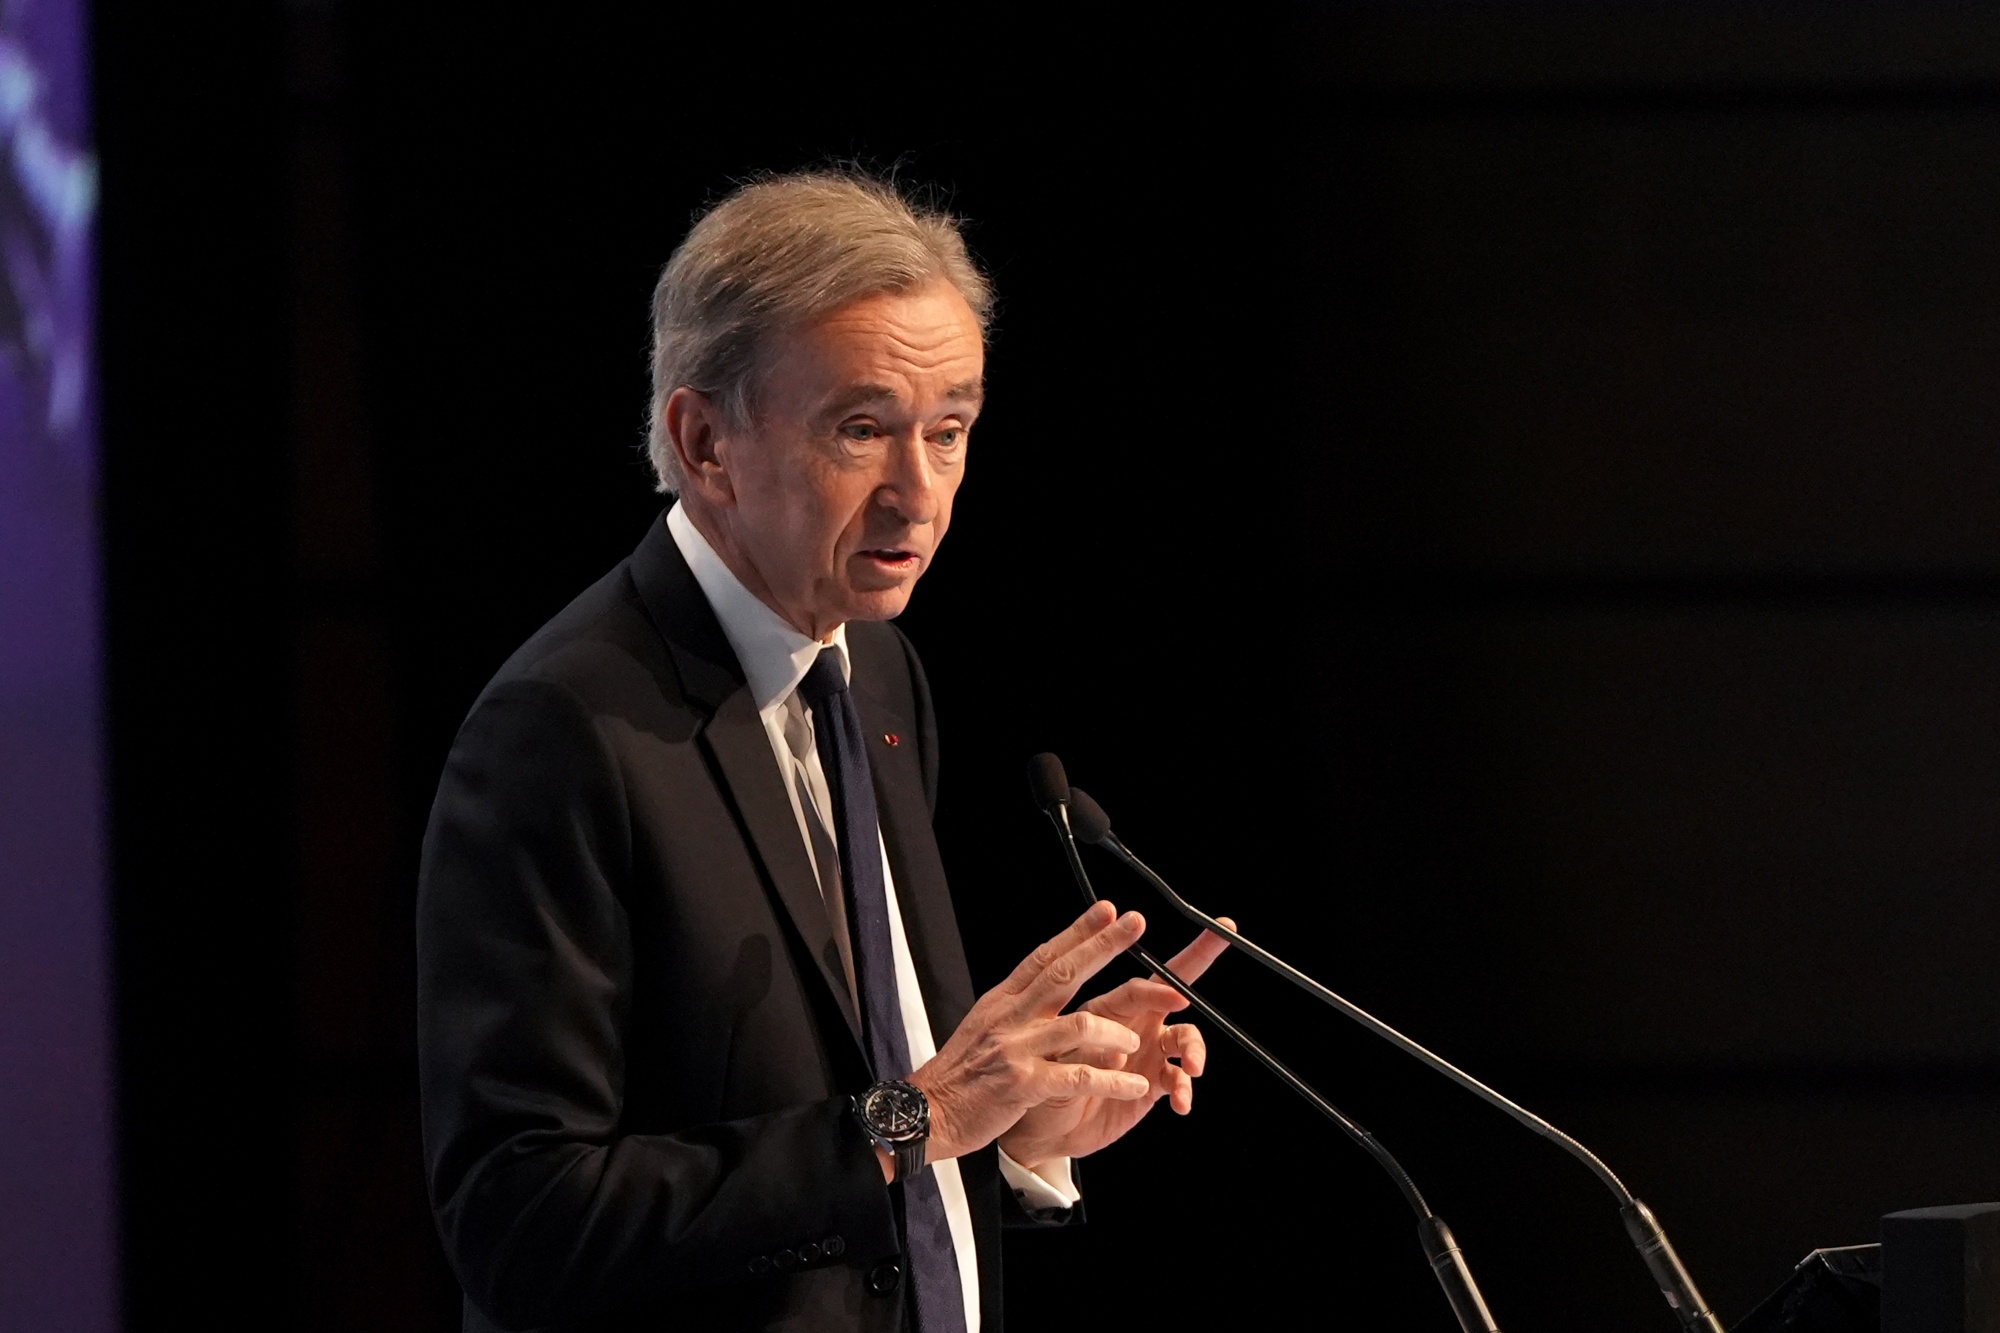 LVMH Hotel Rejected by Beverly Hills Voters in Blow to Bernard Arnault -  Bloomberg